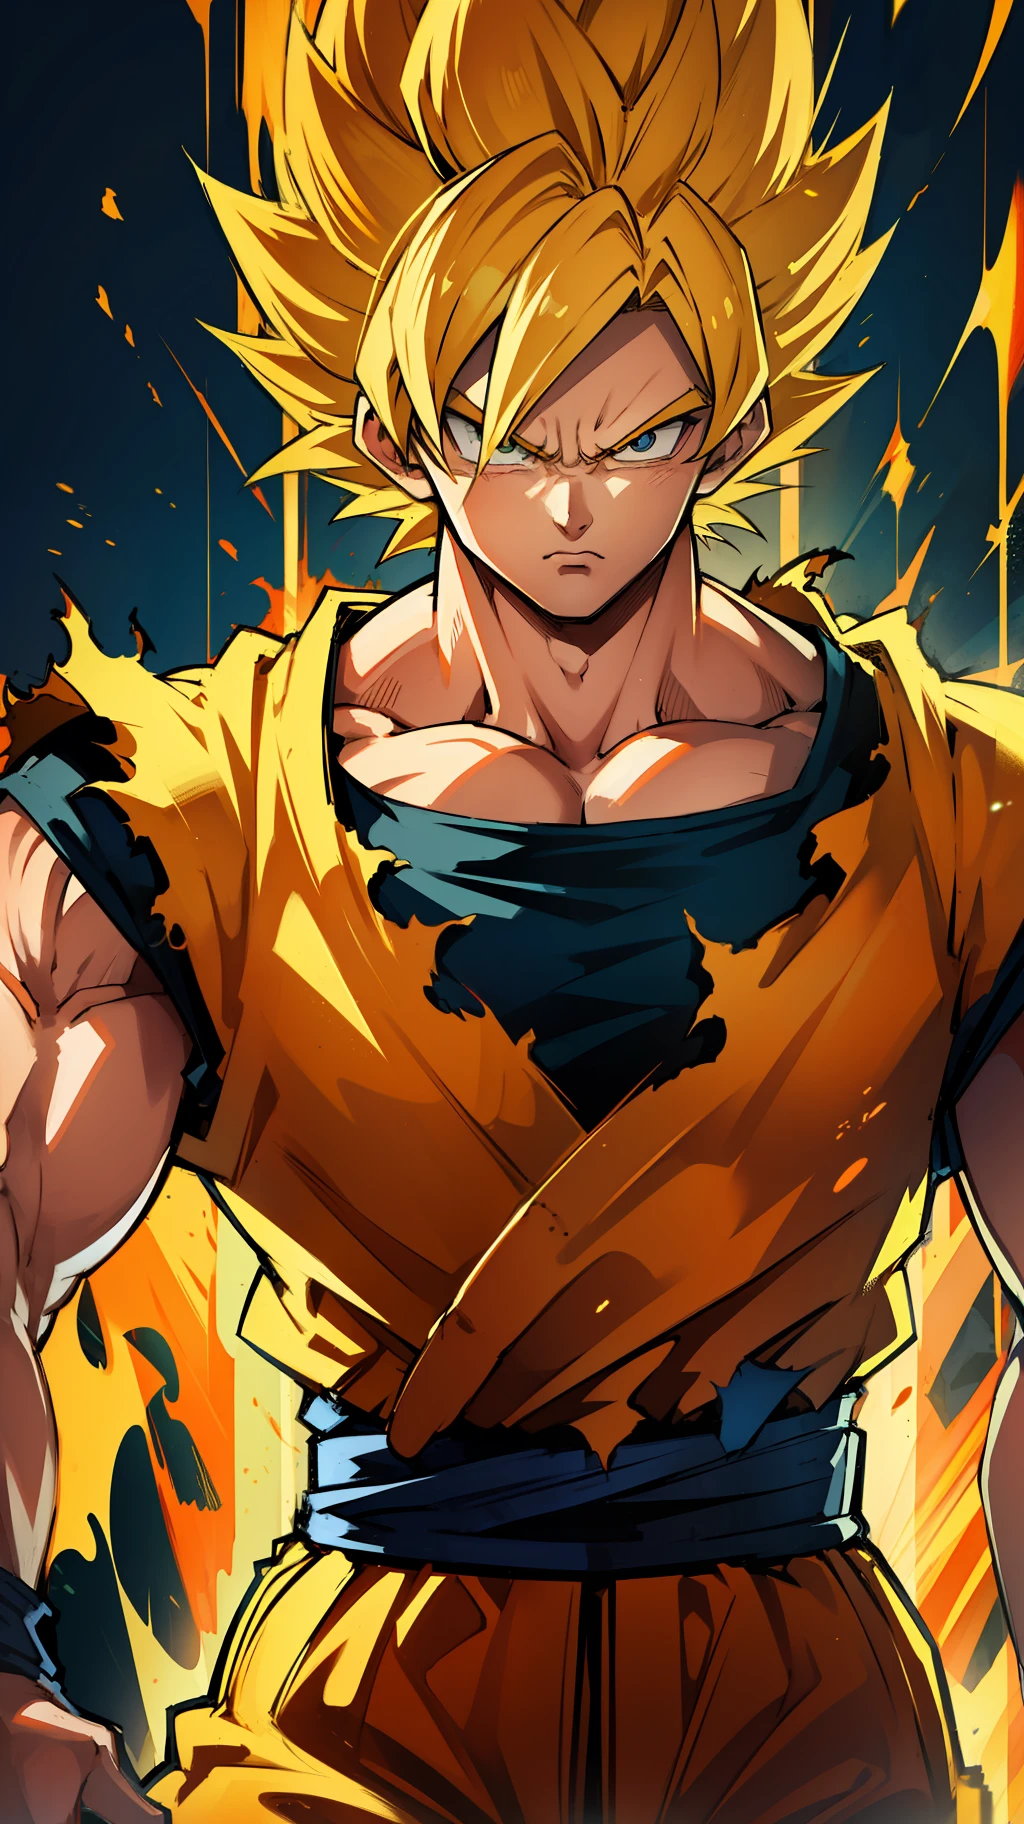 Son goku super sayajin looking at viewer, serious face. Yellow orange aura of power. Muscles. soft light. digital art. traces of 90's anime. Orange Torn clothes. Face defined,